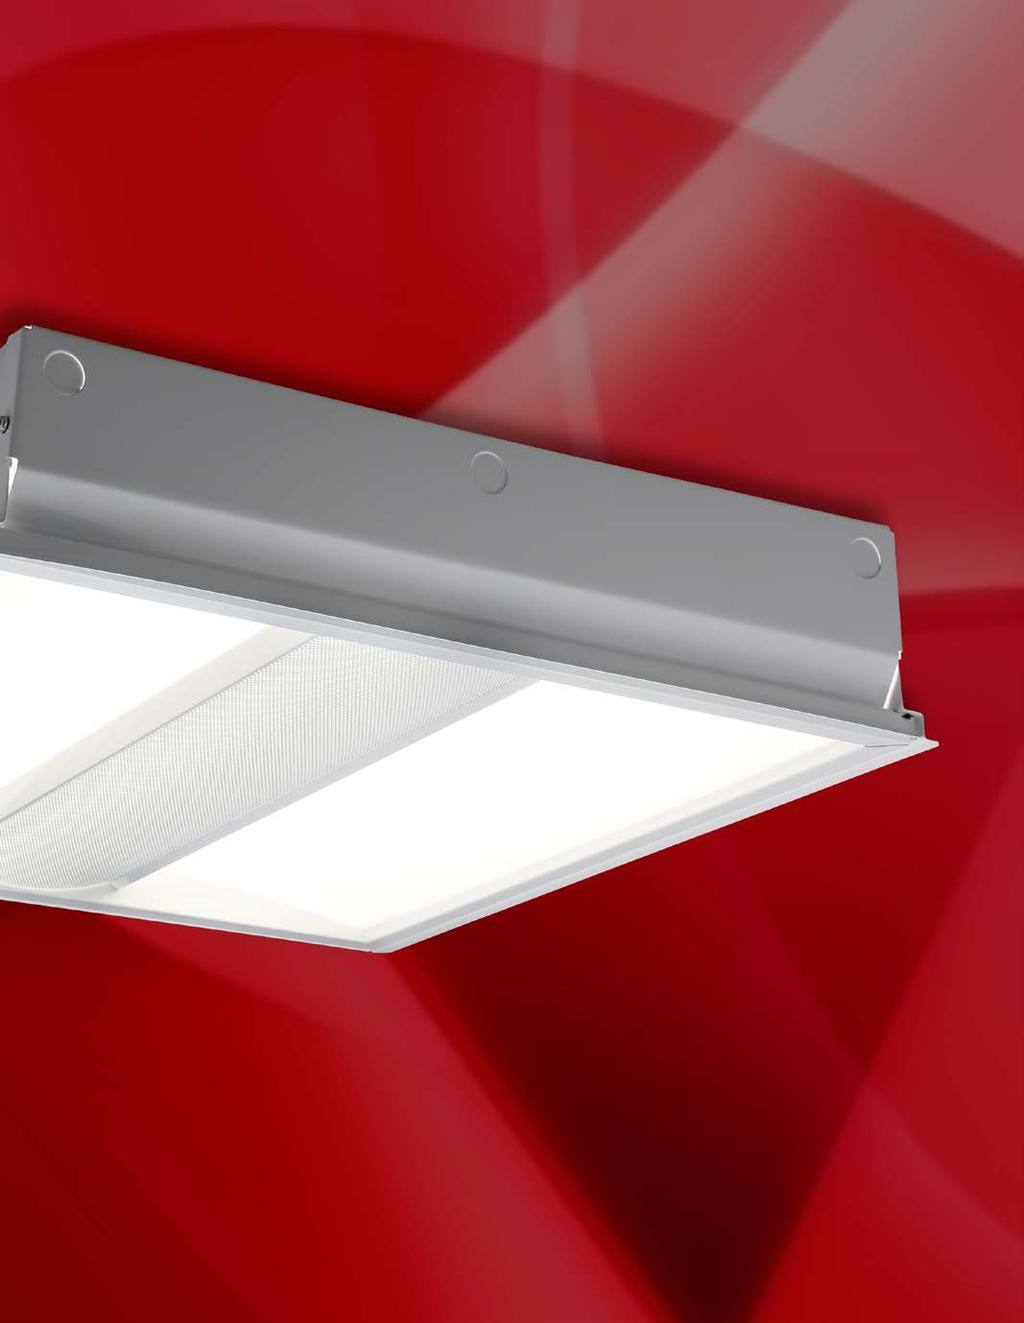 Installs easily in drop ceilings Optional Lutron ecosystem